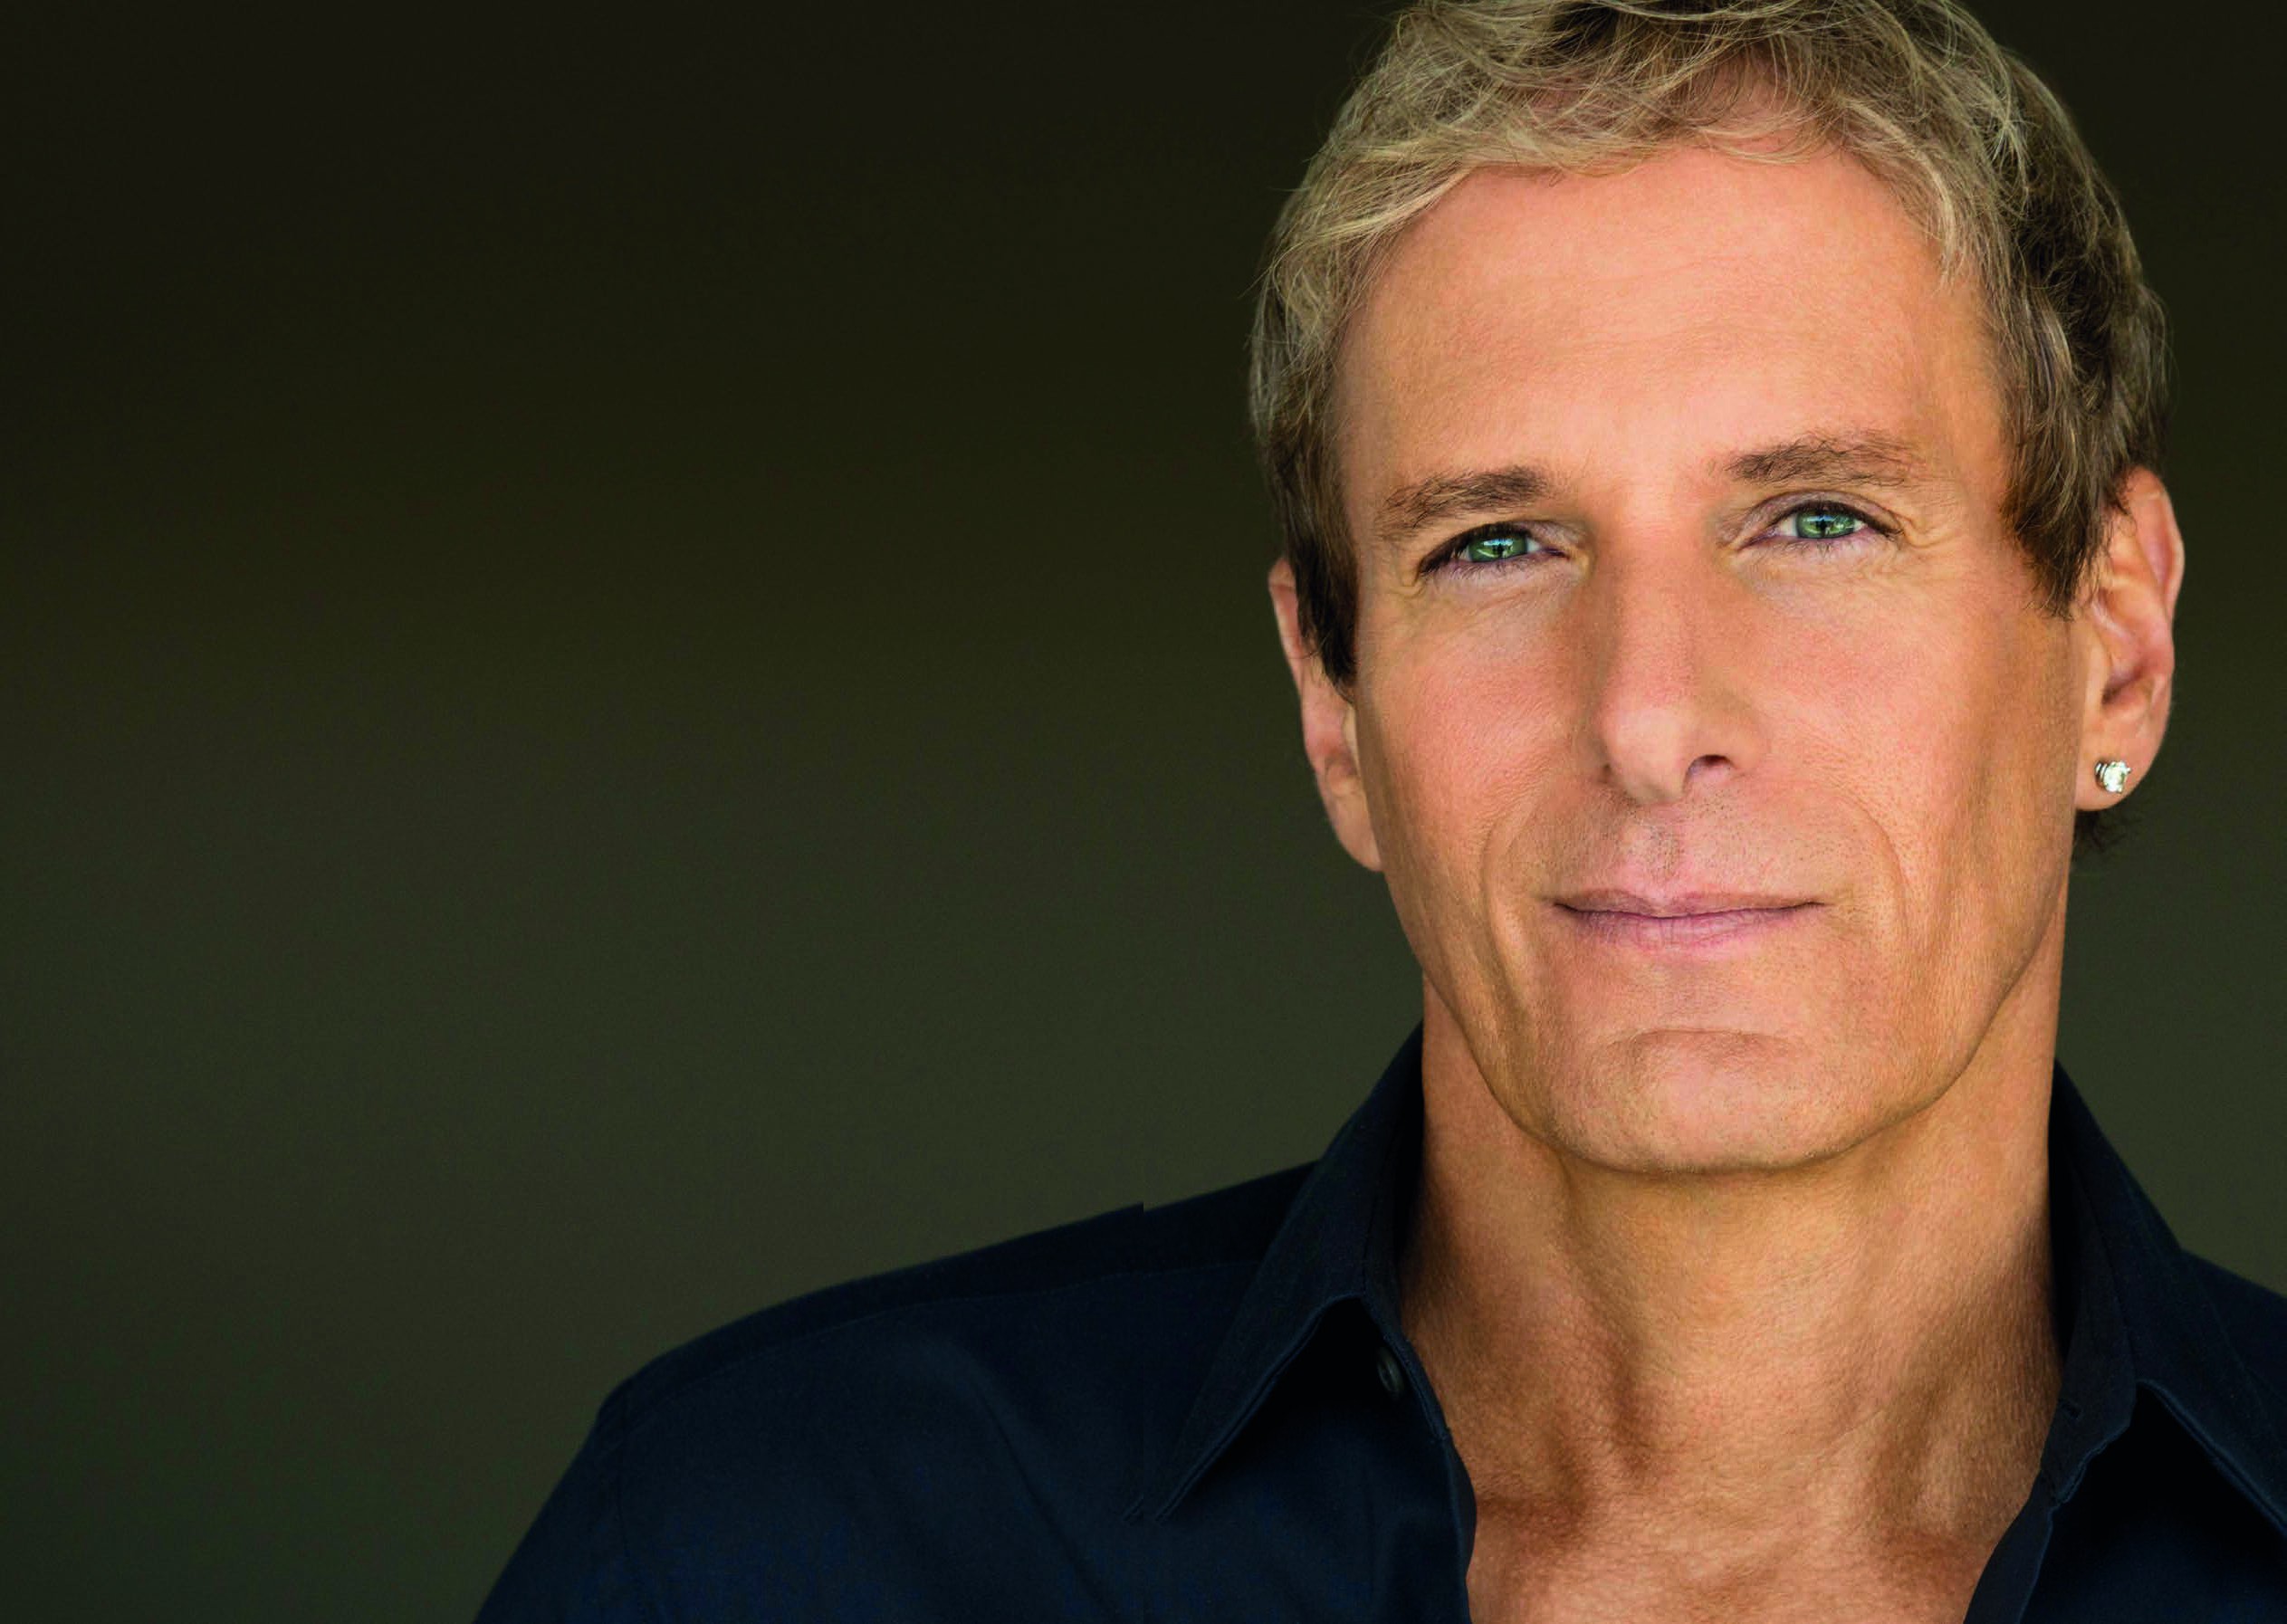 "I don't have to take myself so seriously" Michael Bolton interview